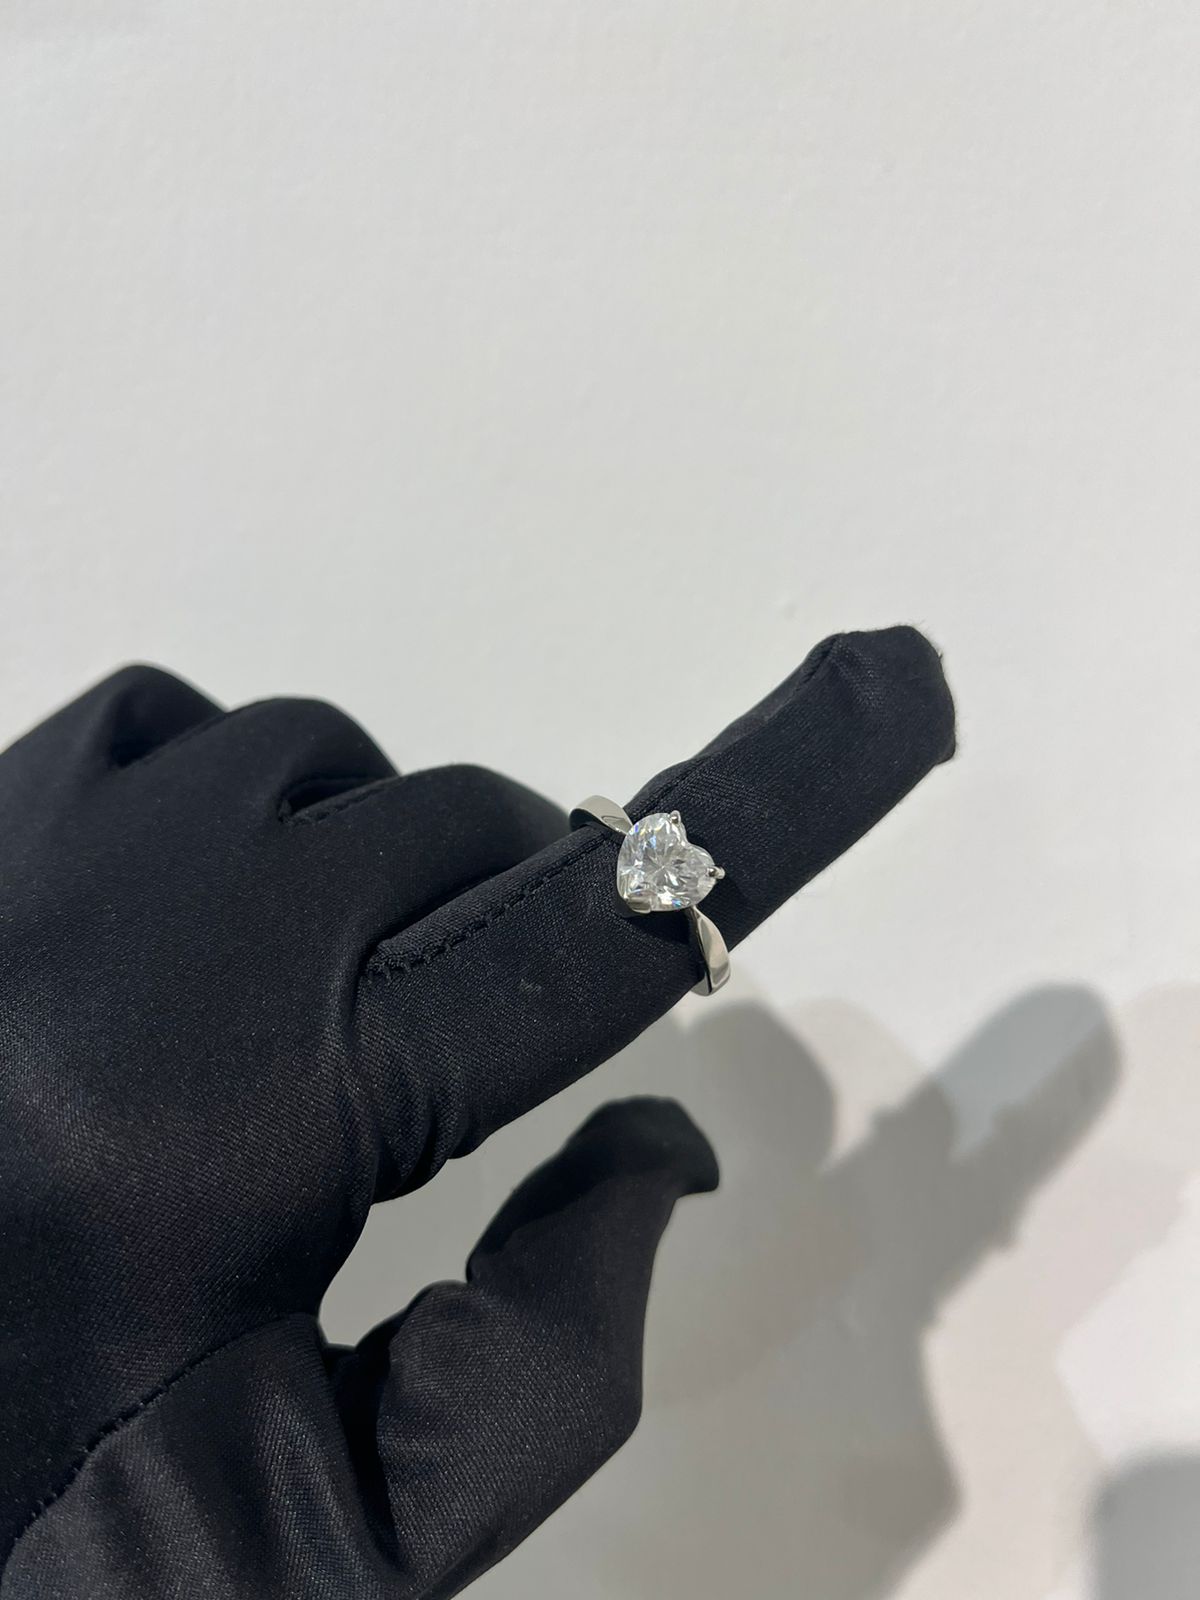 2.5 Carat Heart Moissanite Lab Diamond Ring in 925 Silver ( 18KT White Gold Plated)